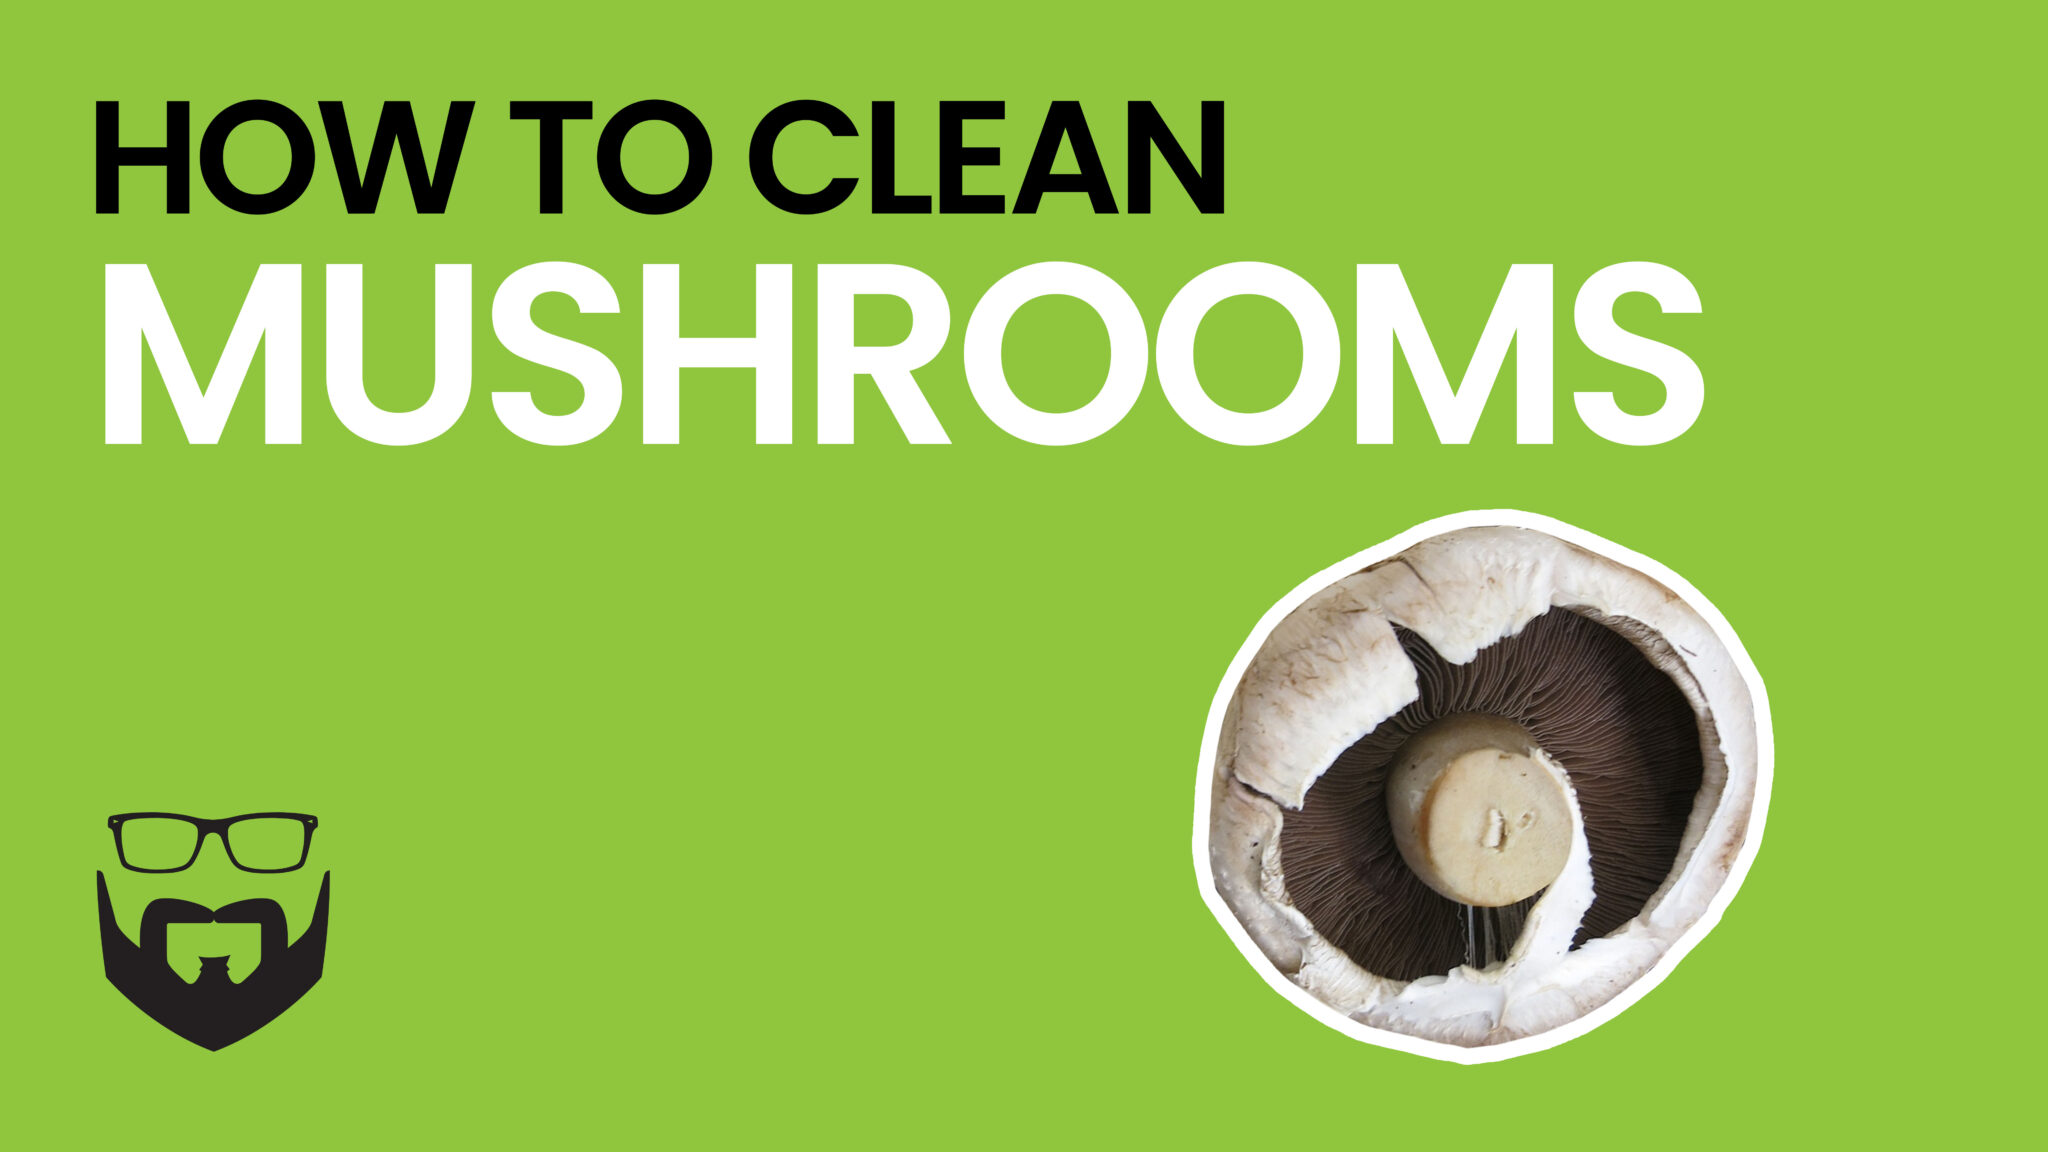 How to Clean Mushrooms Video - Green